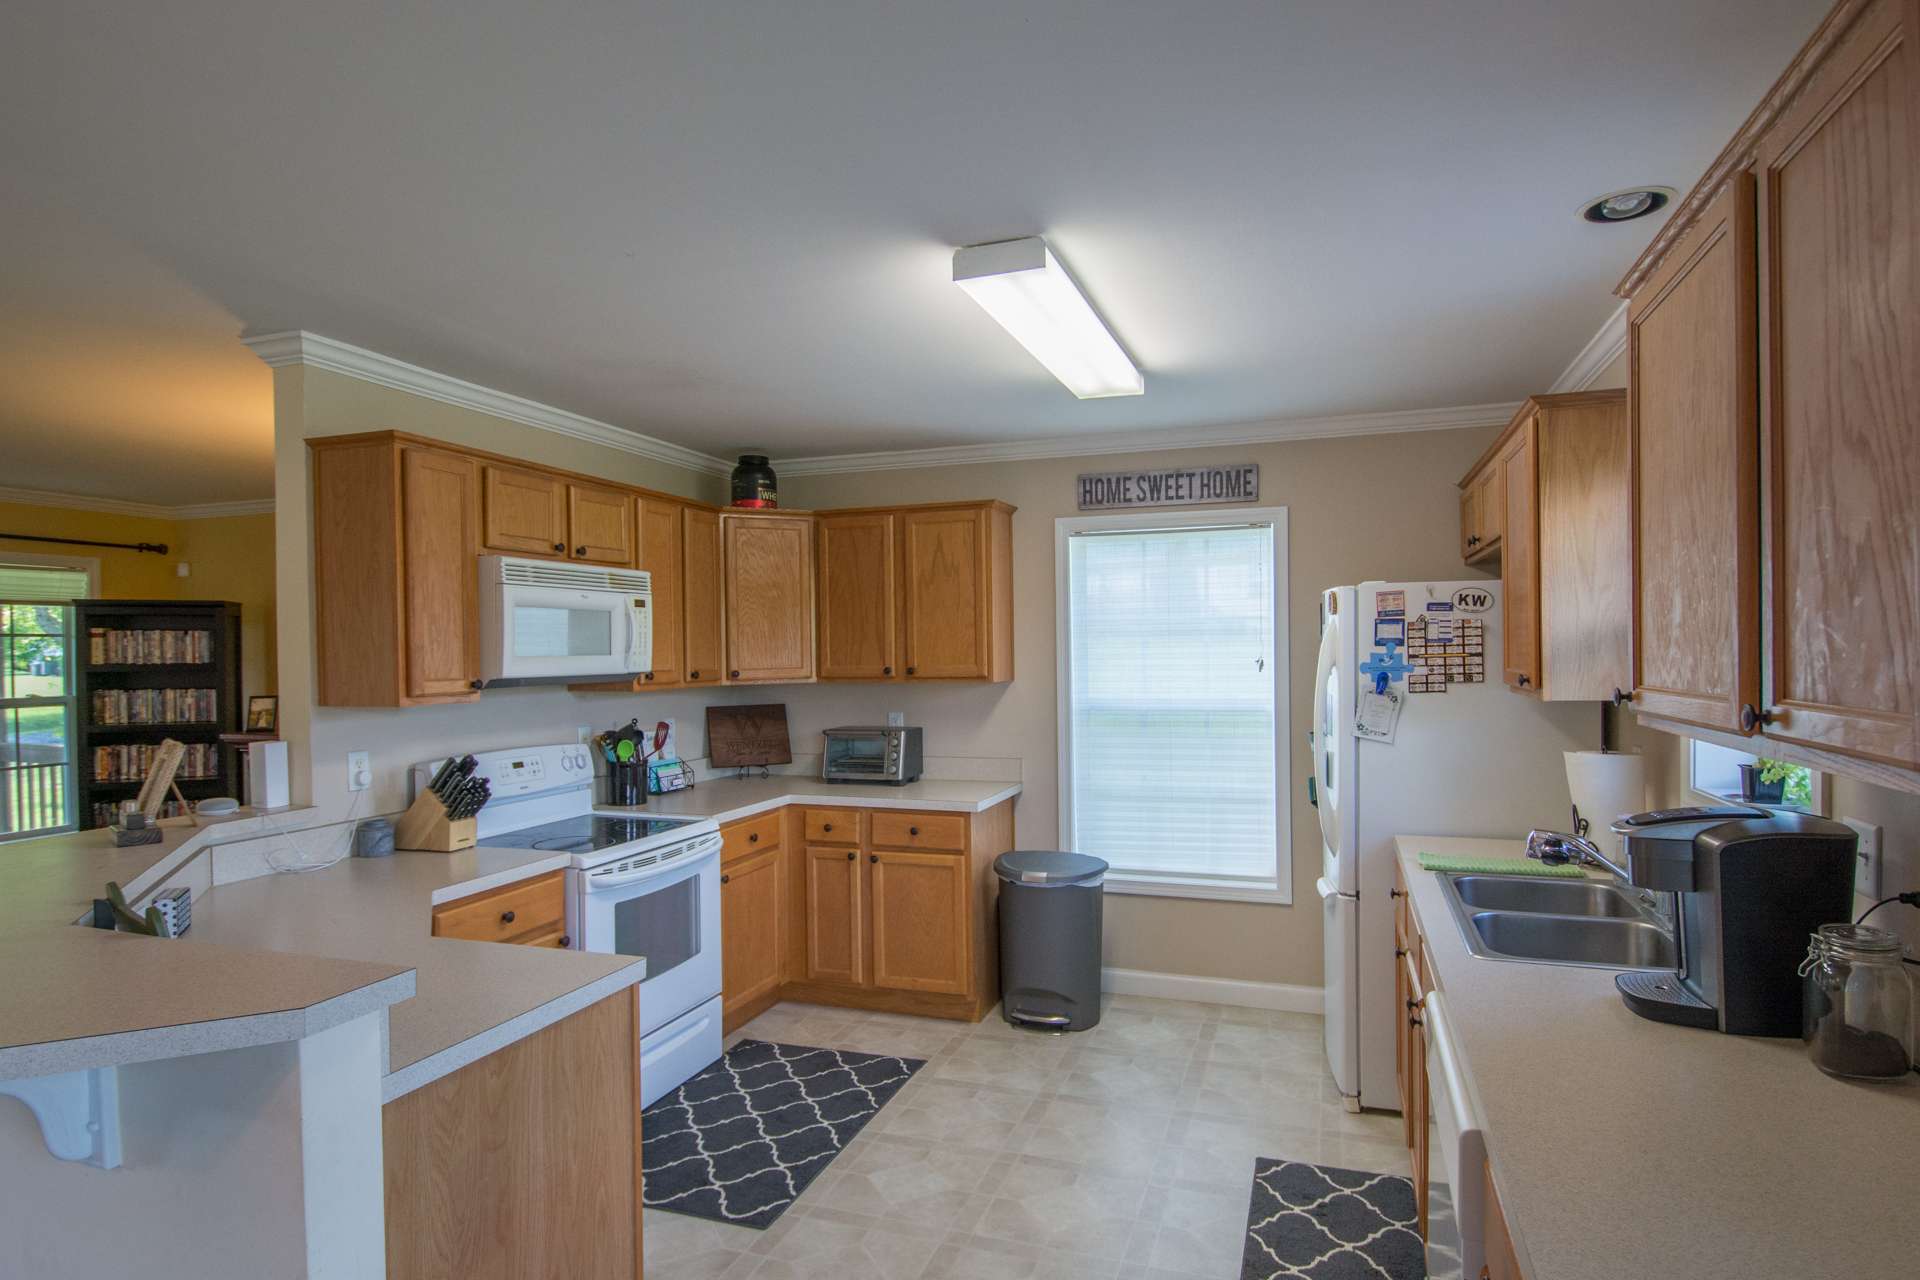 The kitchen offers plenty of work and storage space and includes a bar with seating space.